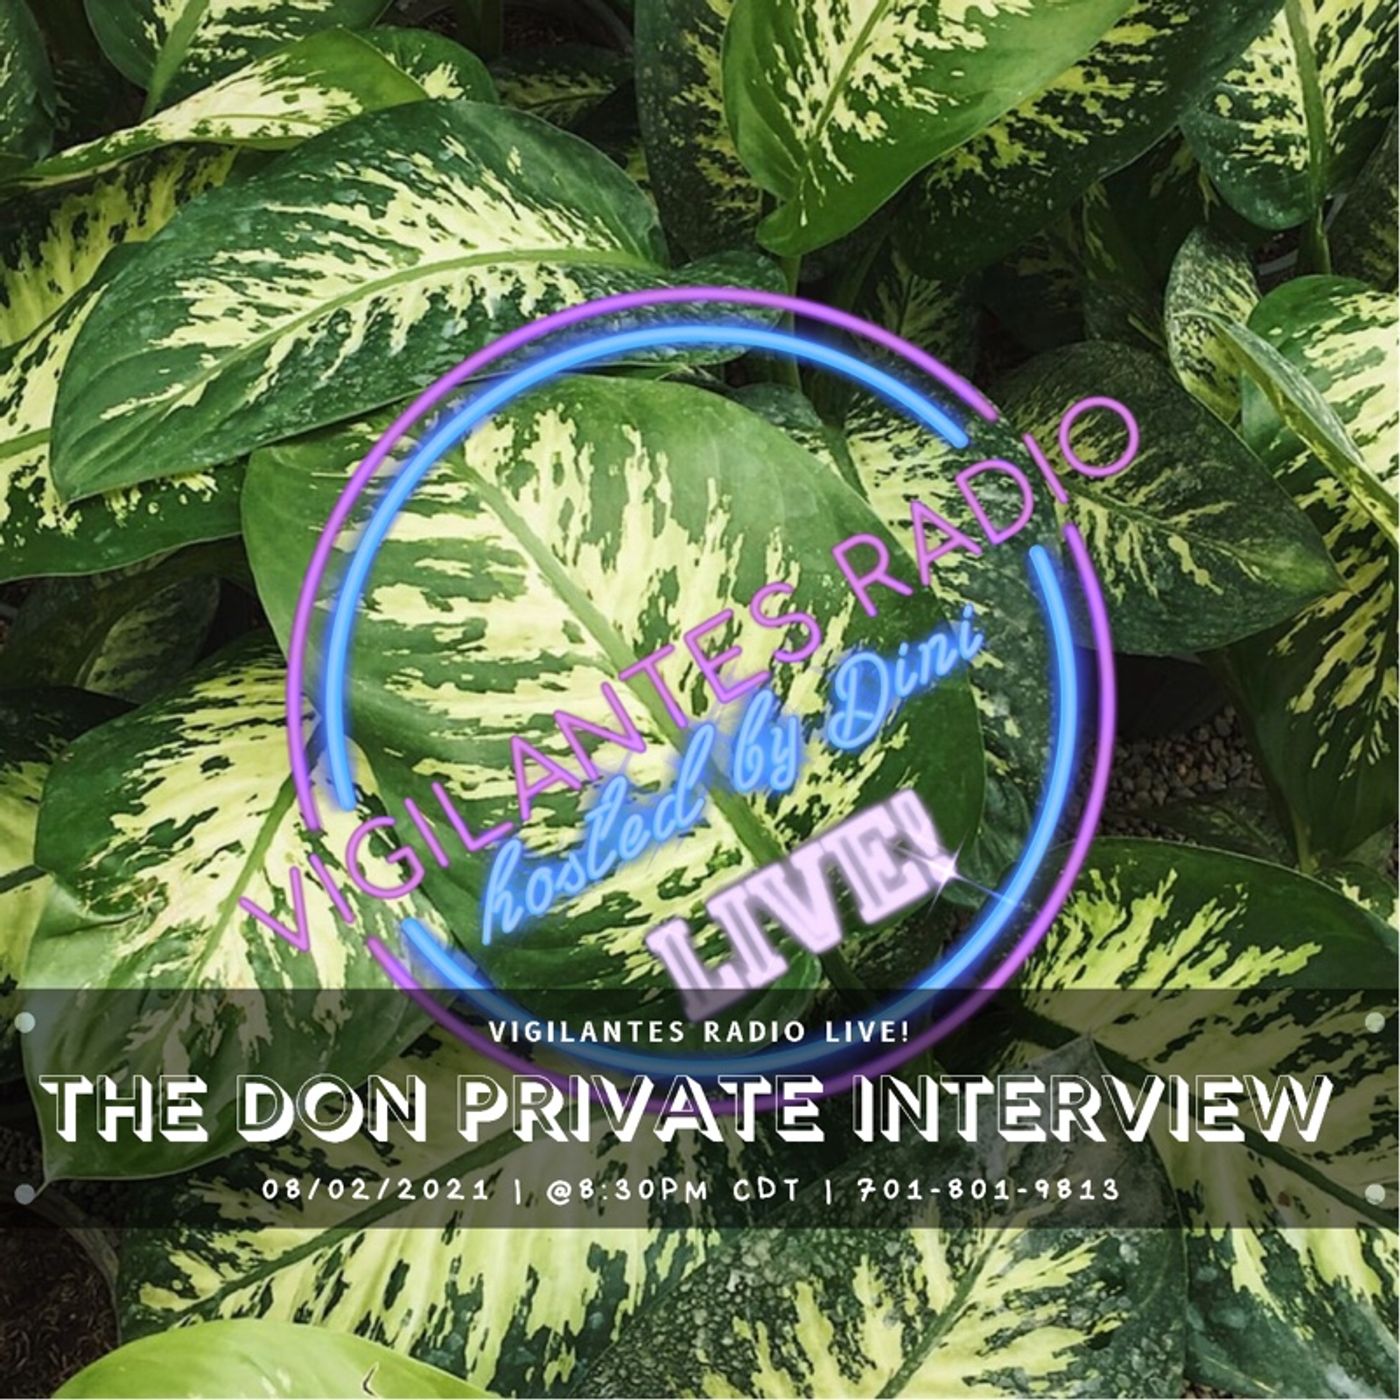 The Don Private Interview. Image